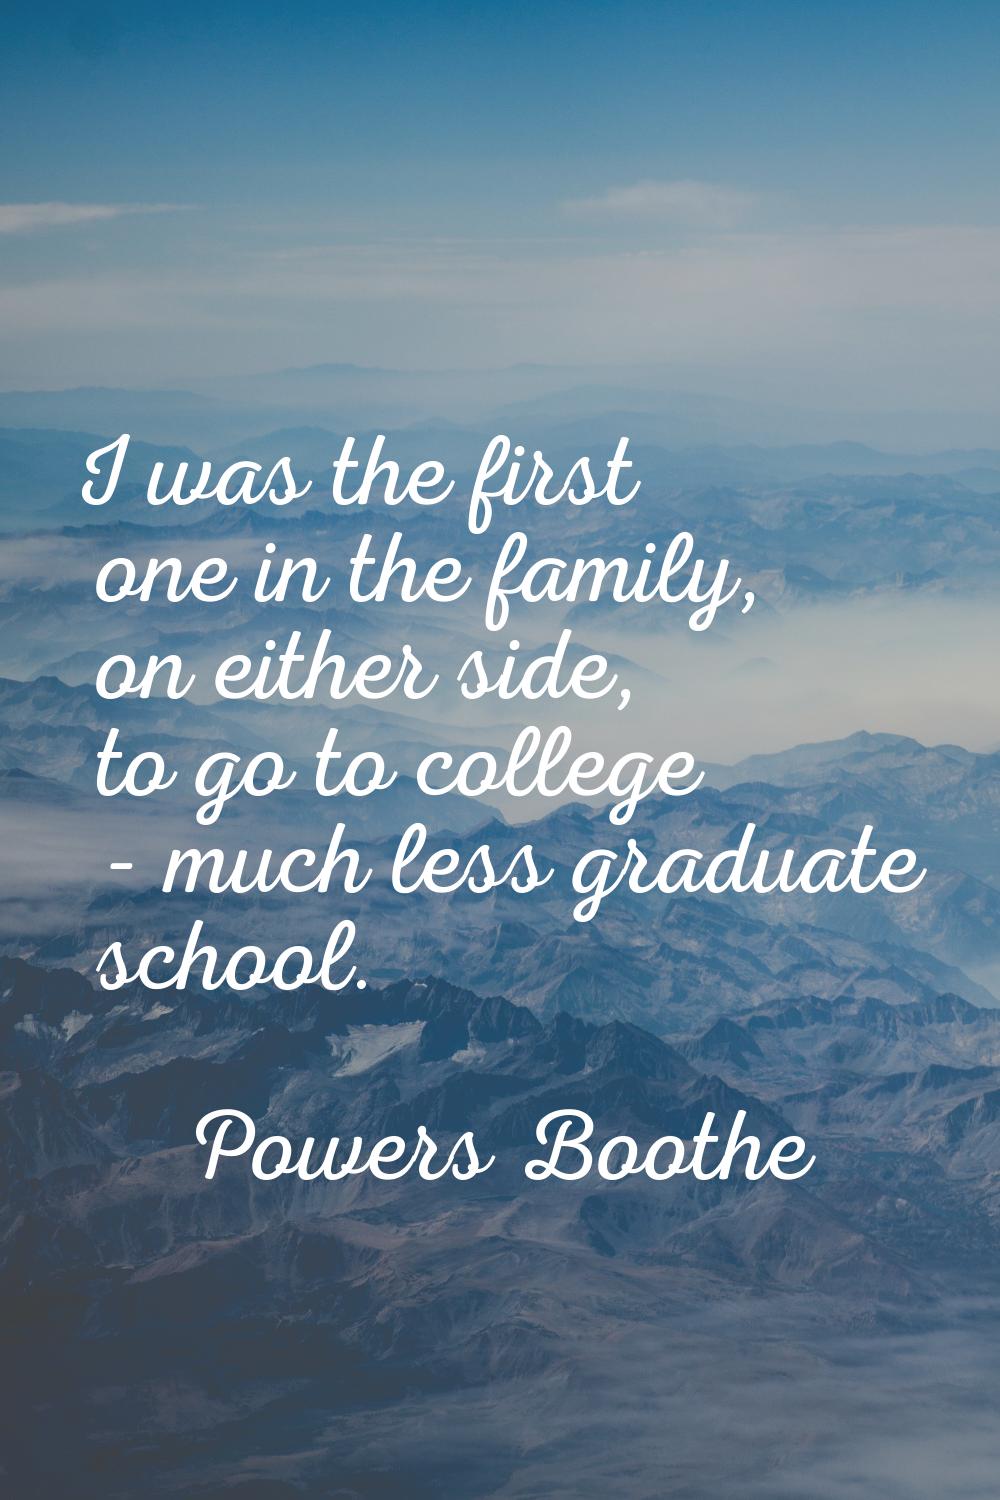 I was the first one in the family, on either side, to go to college - much less graduate school.